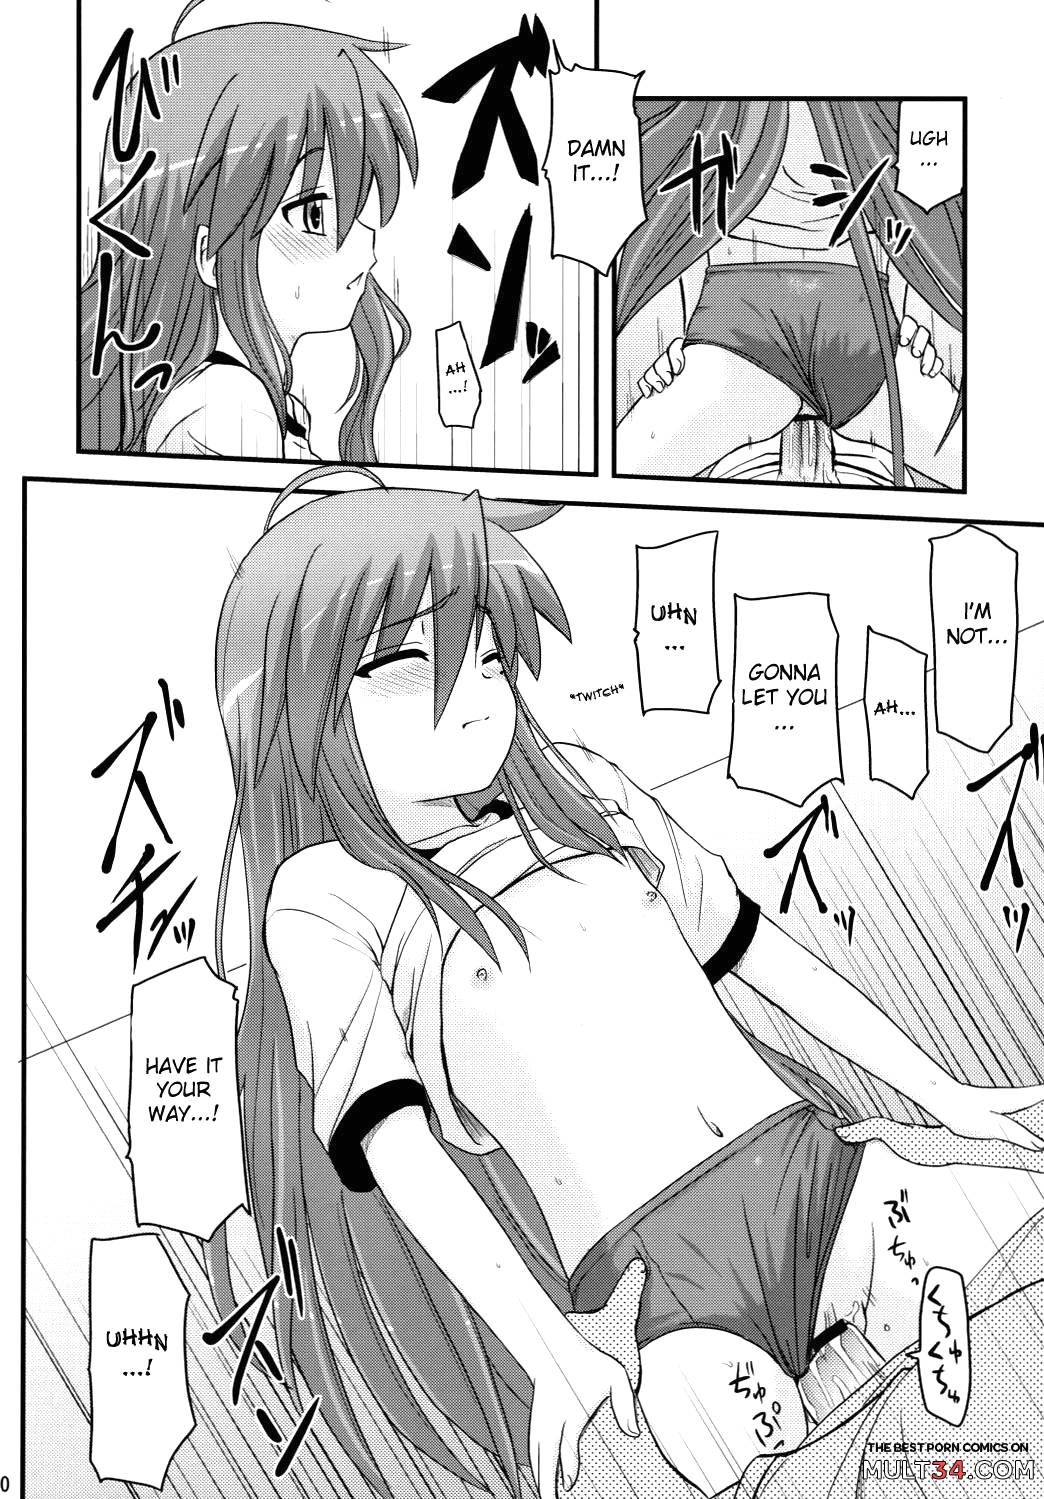 Konata and Oh-zu 4 people each and every one + 1 page 16